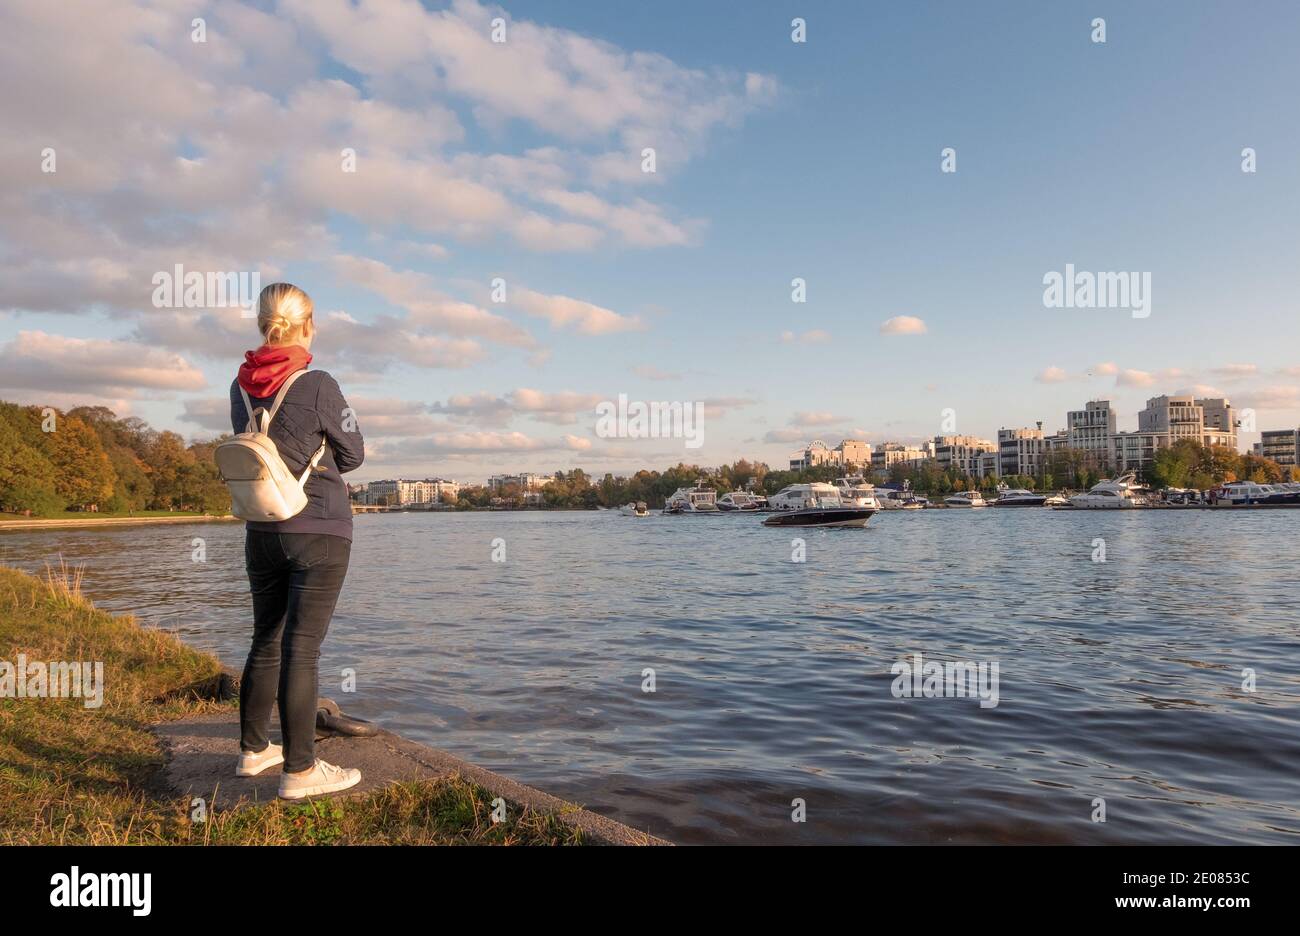 A young woman in casual comfortable clothes and with a backpack stands on the river bank admiring the view. Solo travel, local tourism concept. Stock Photo